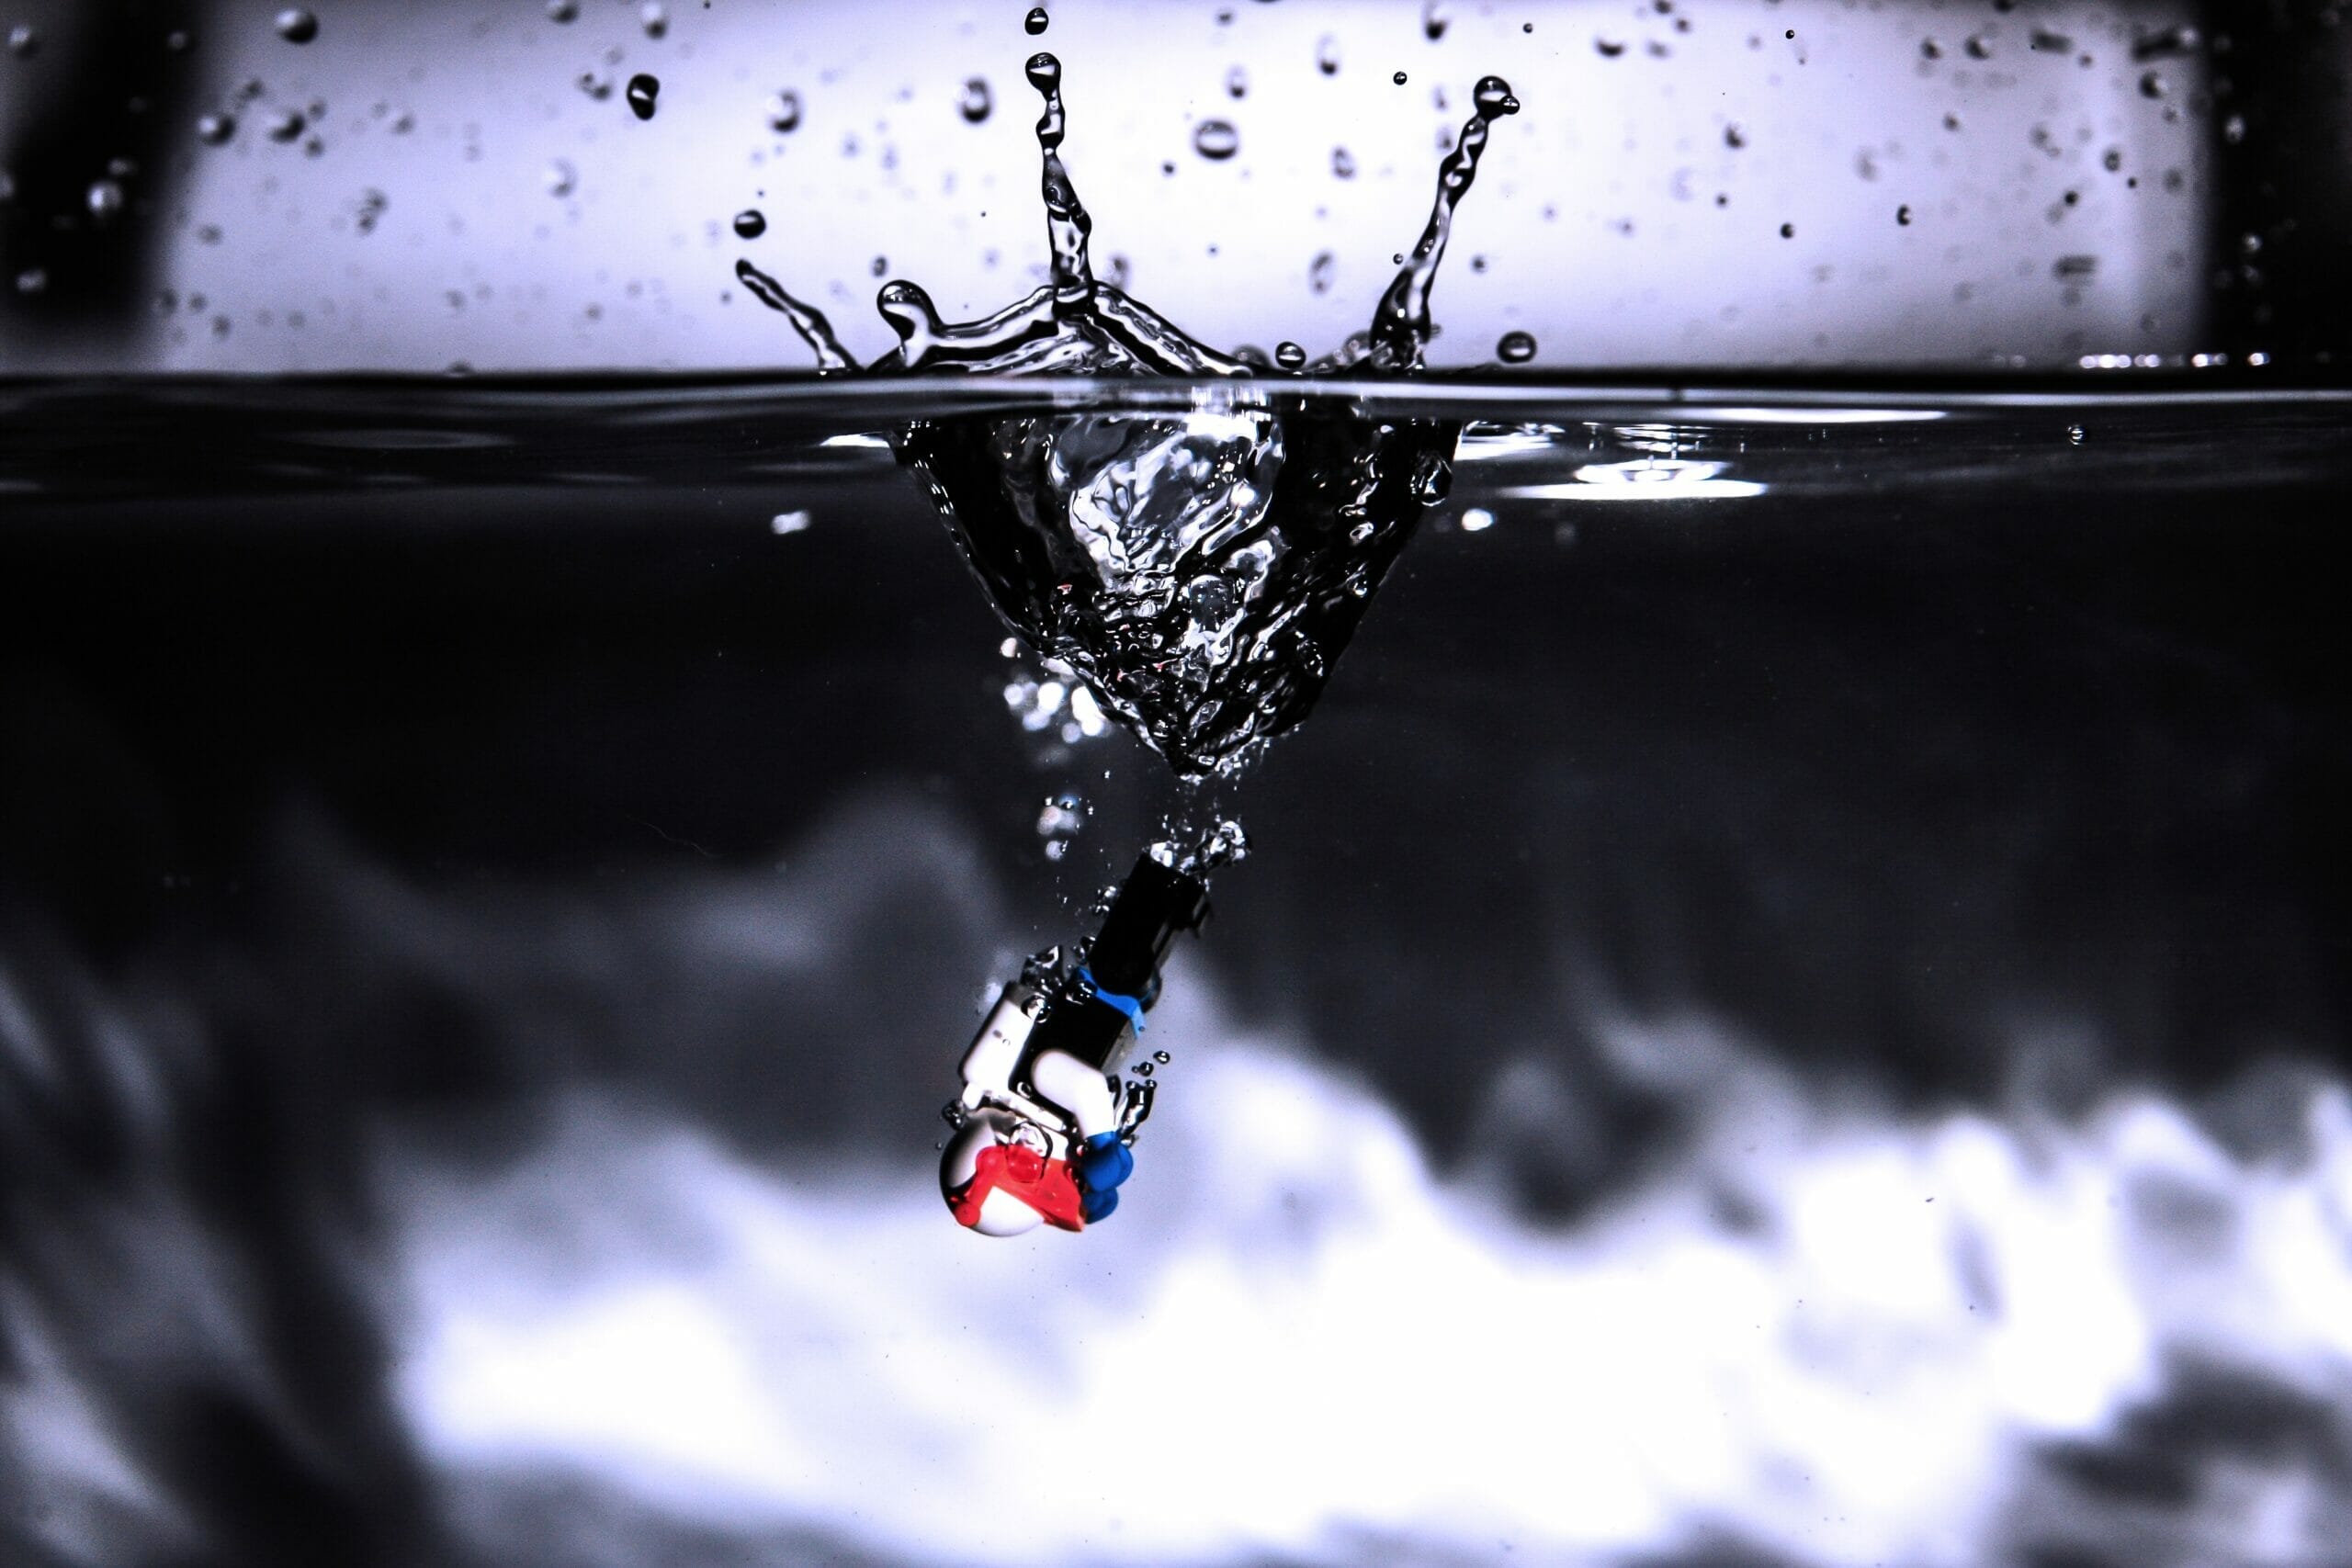 lego water spray blow immersion scaled